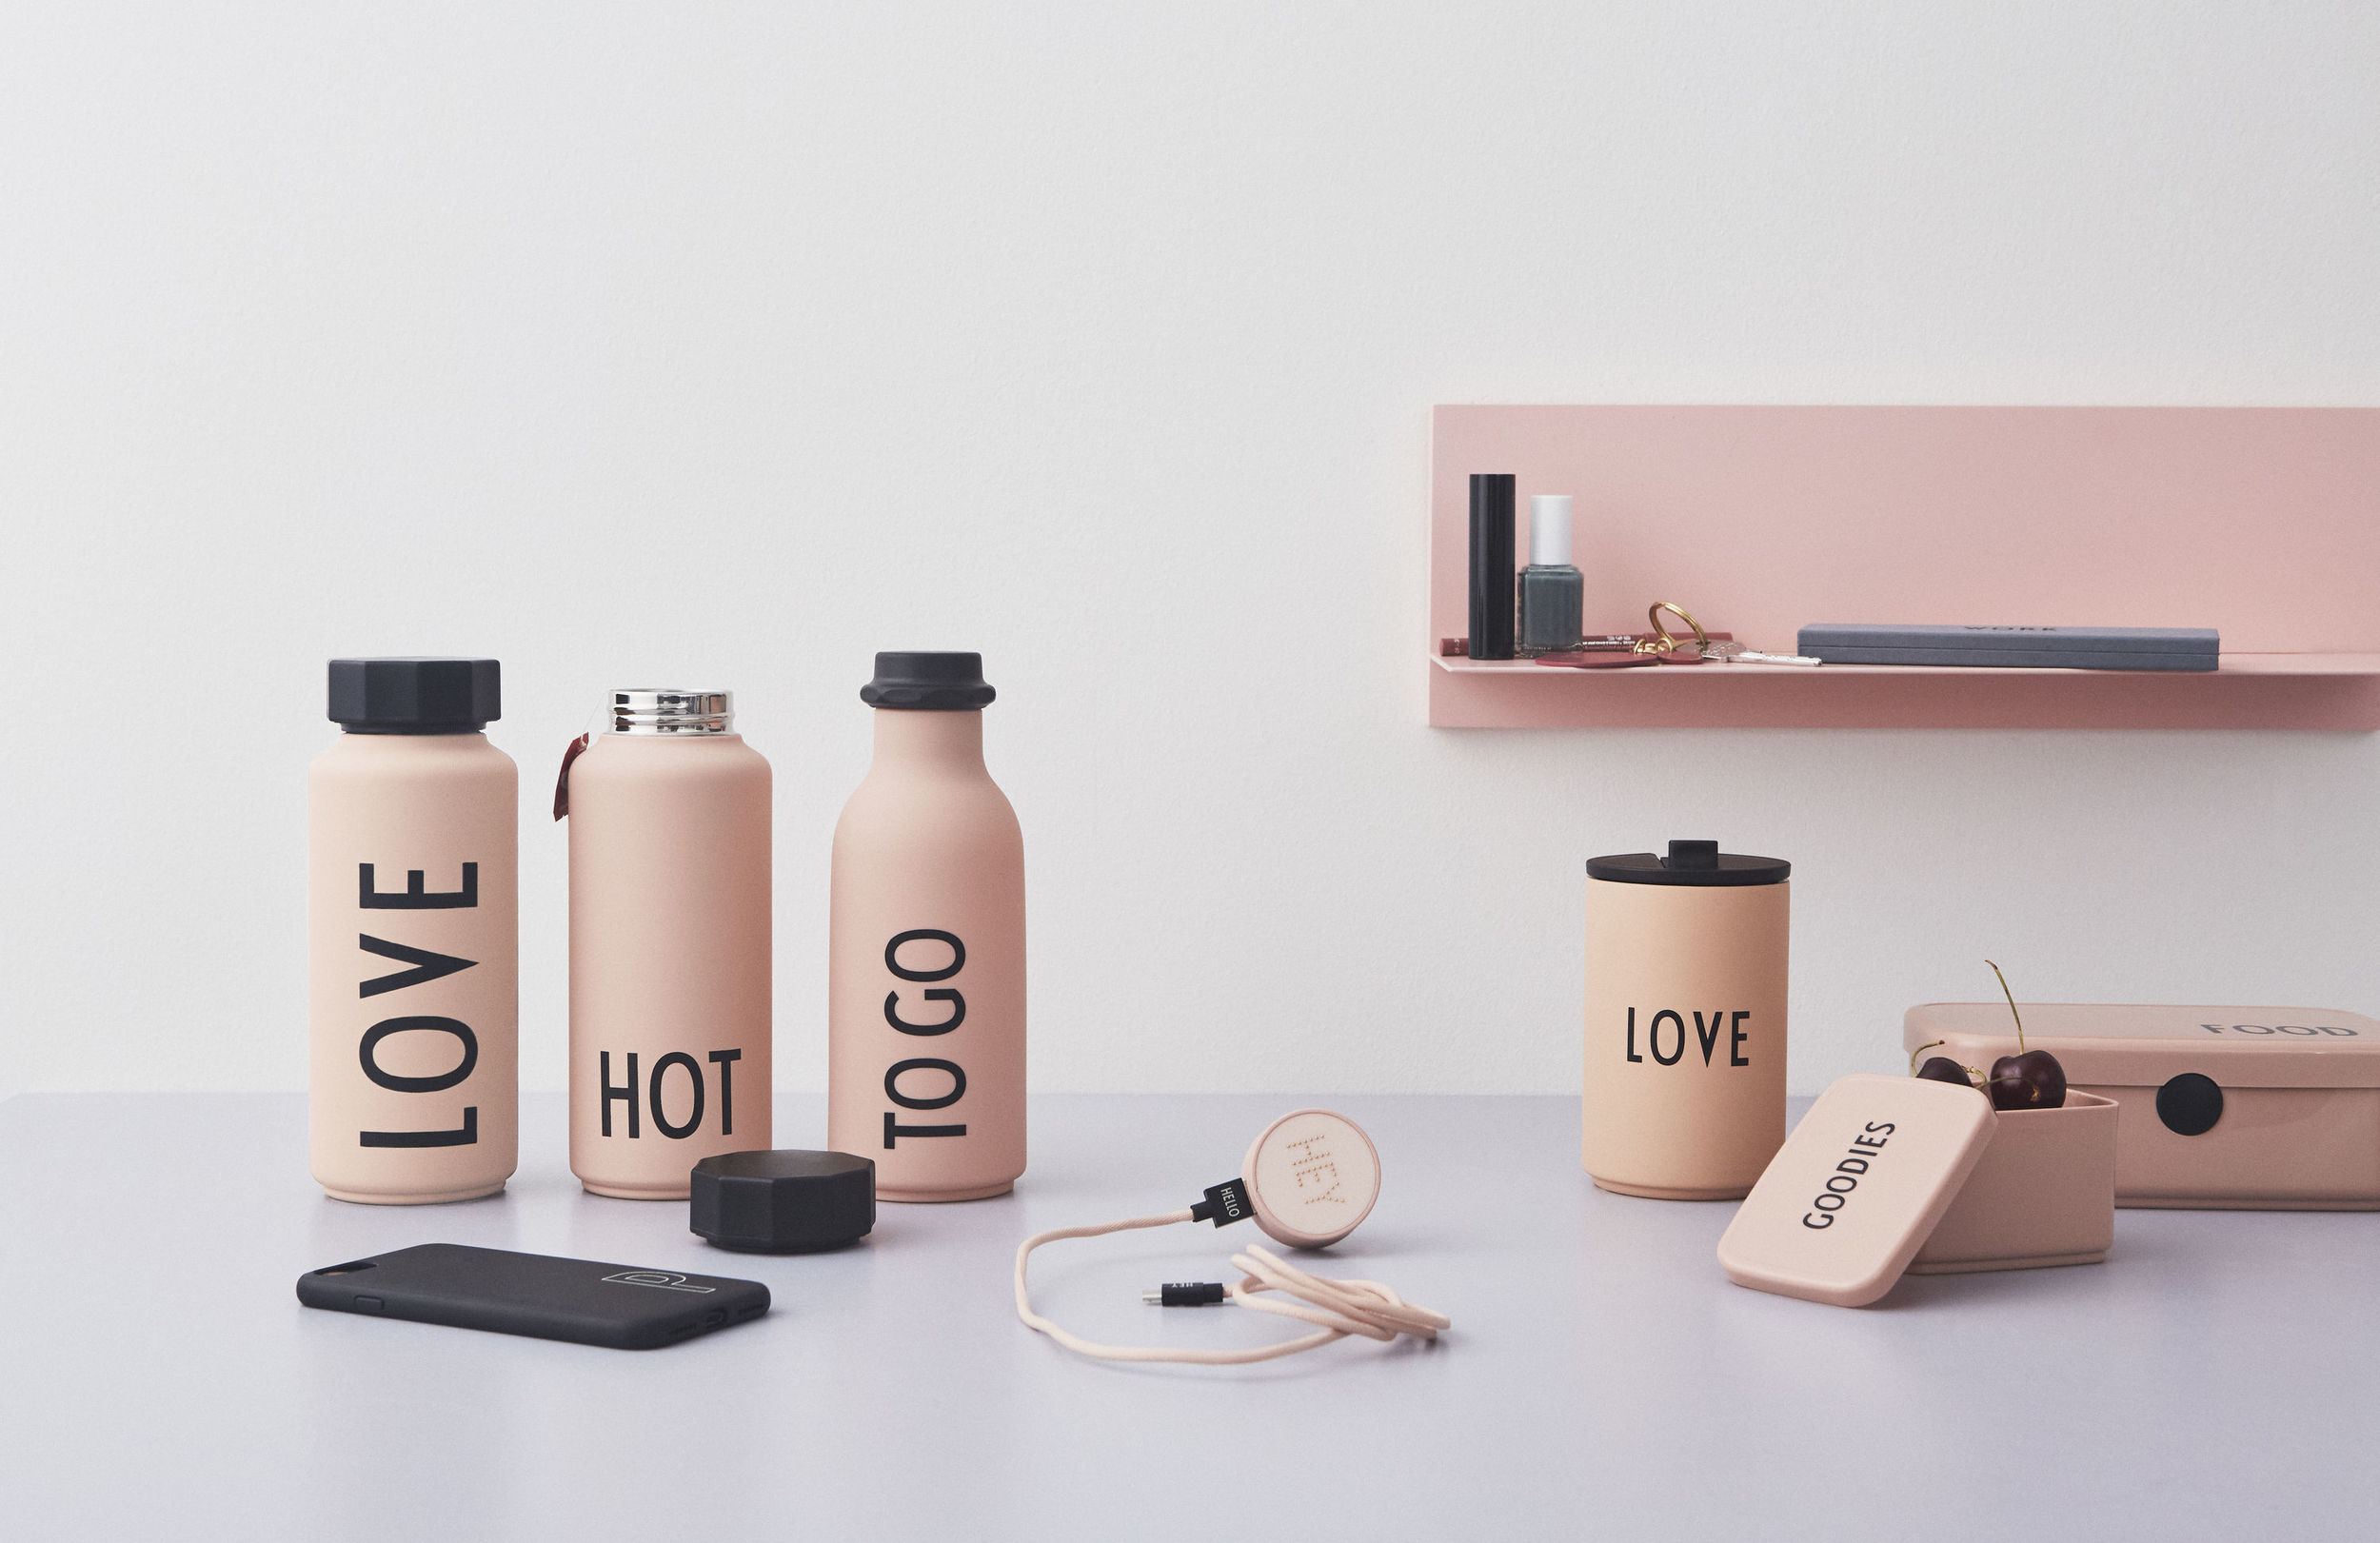 https://3fa-media.com/design-letters/design-letters-hot-thermos-special-edition__80782_2db3f17-s2500x2500.jpg